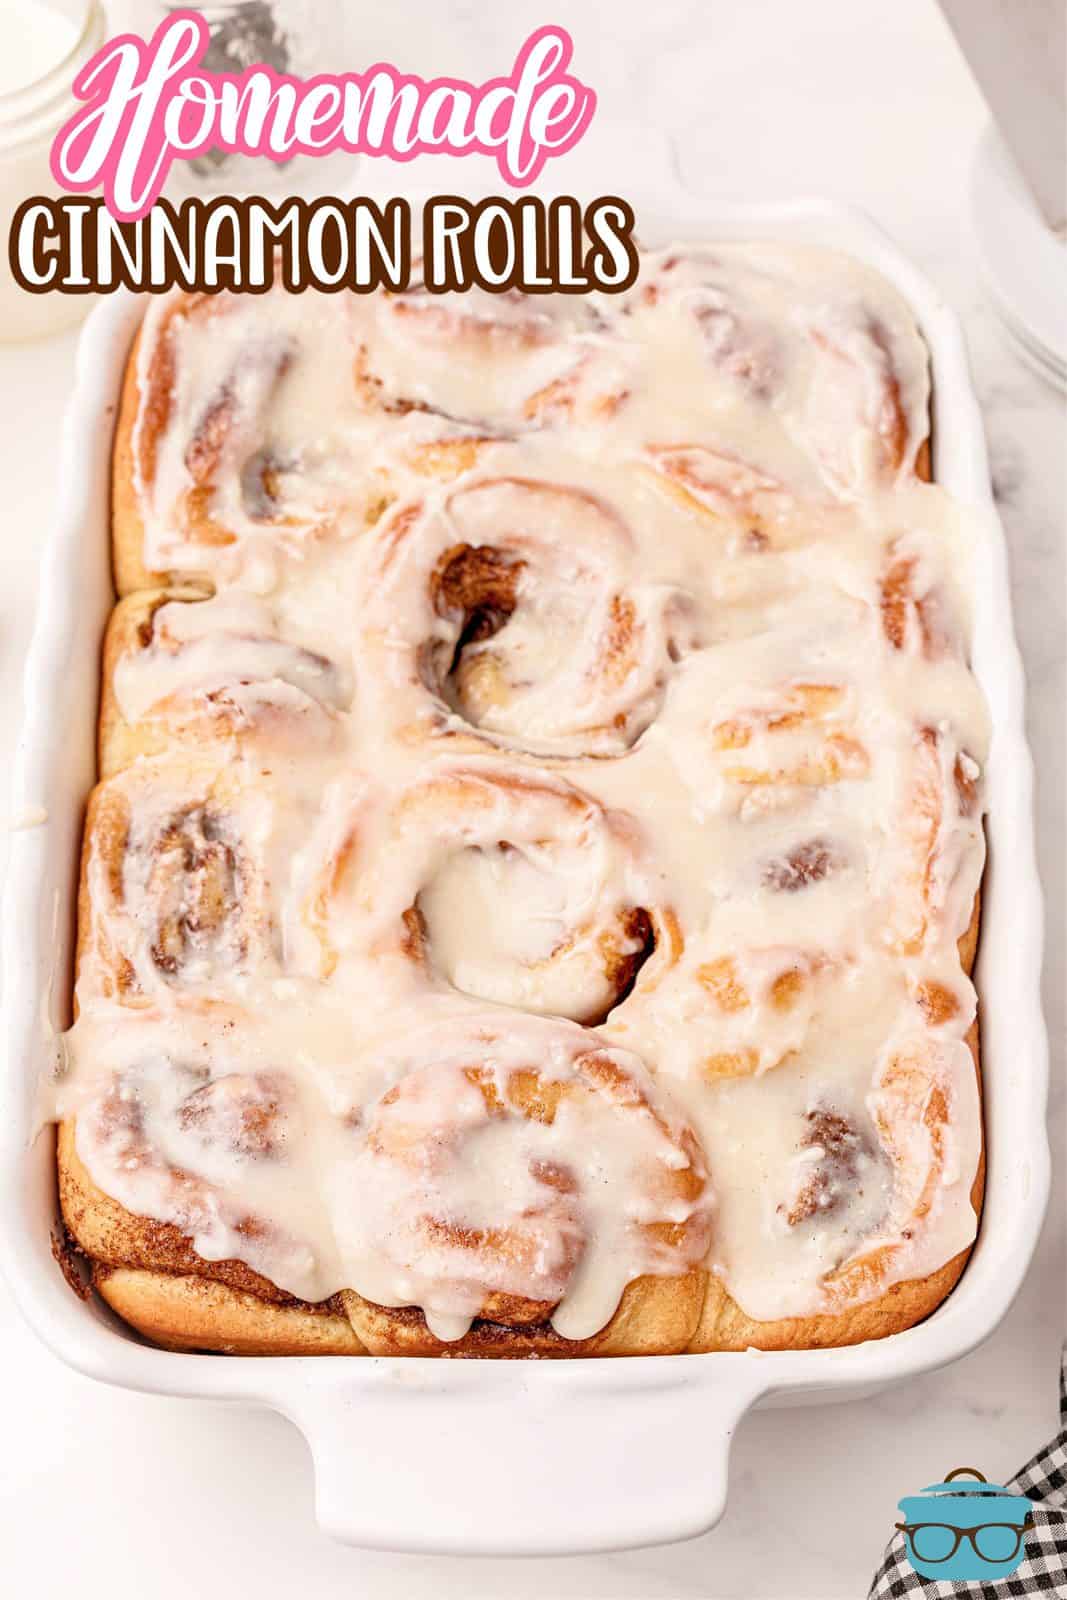 Pinterest image of Homemade Cinnamon Rolls in pan at angle showing icing.